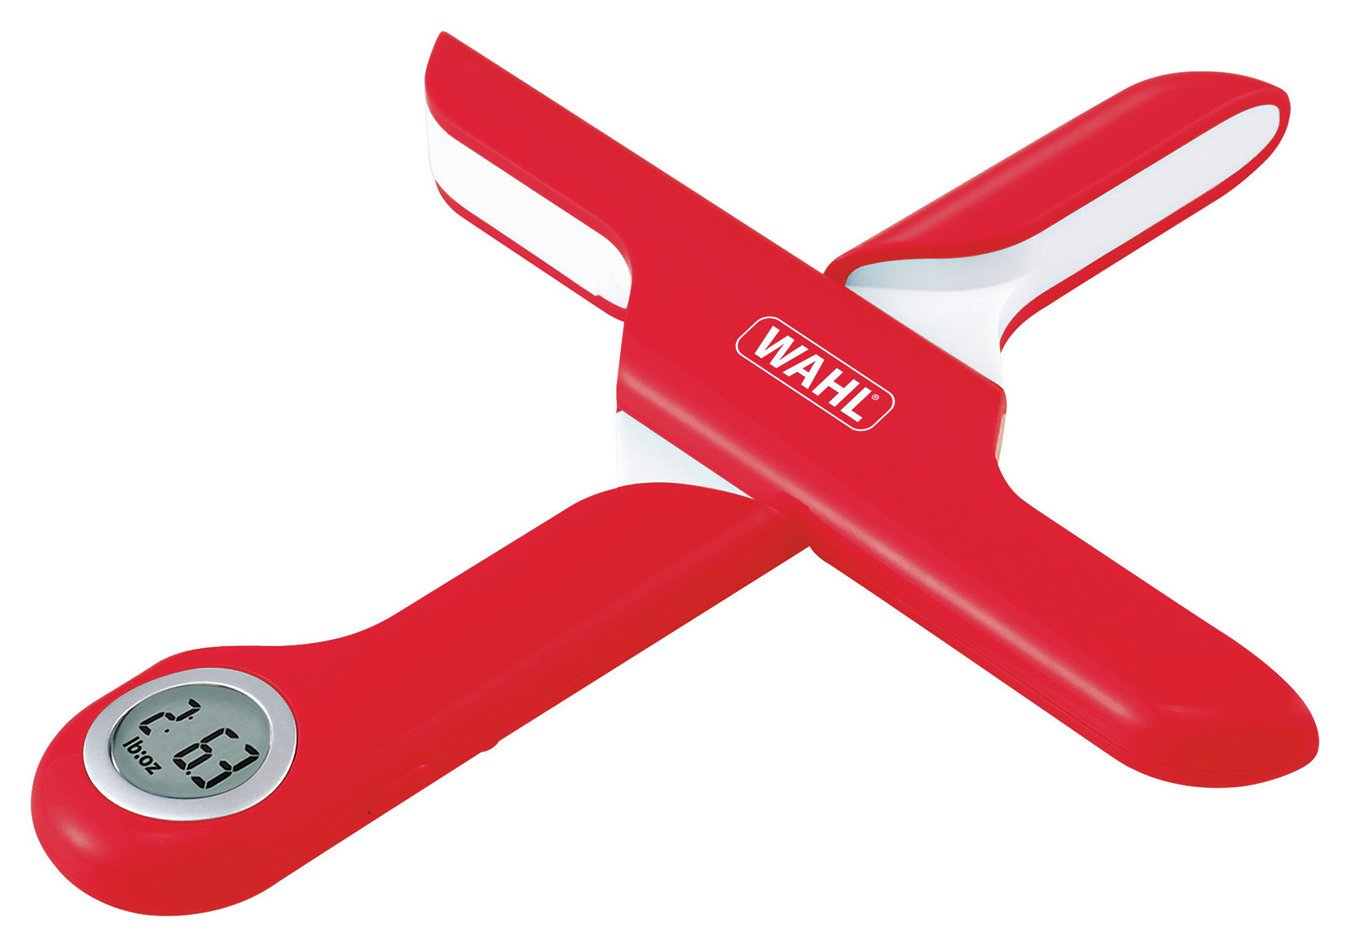 Wahl Folding Digital Scales - Red.